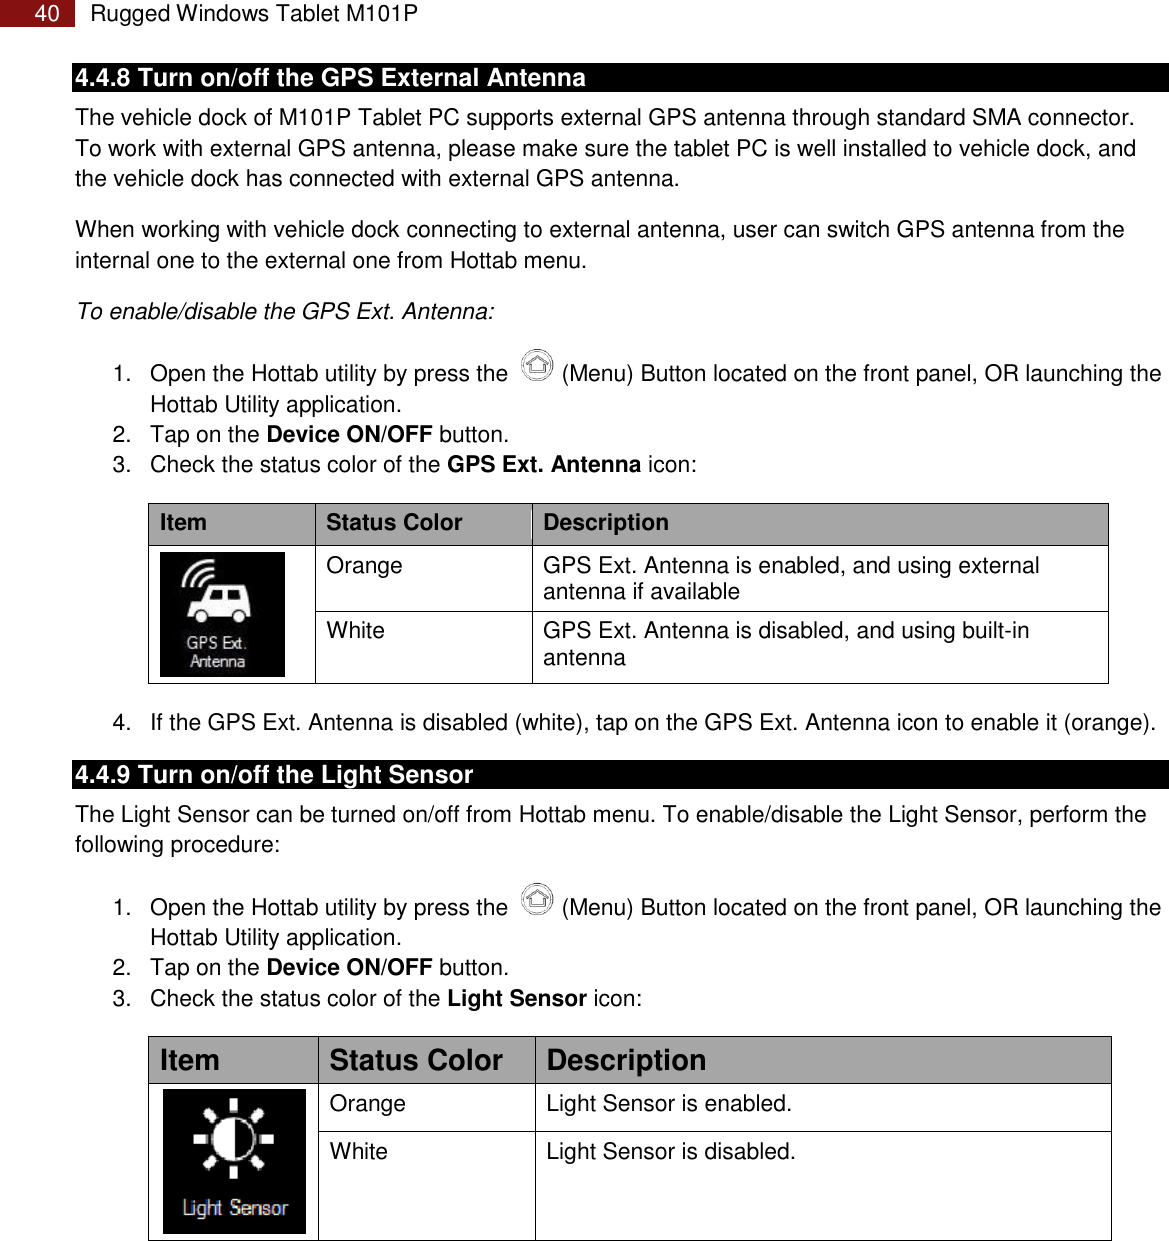 Page 40 of Winmate M101P Rugged Tablet PC User Manual Rugged Windows Tablet M101P